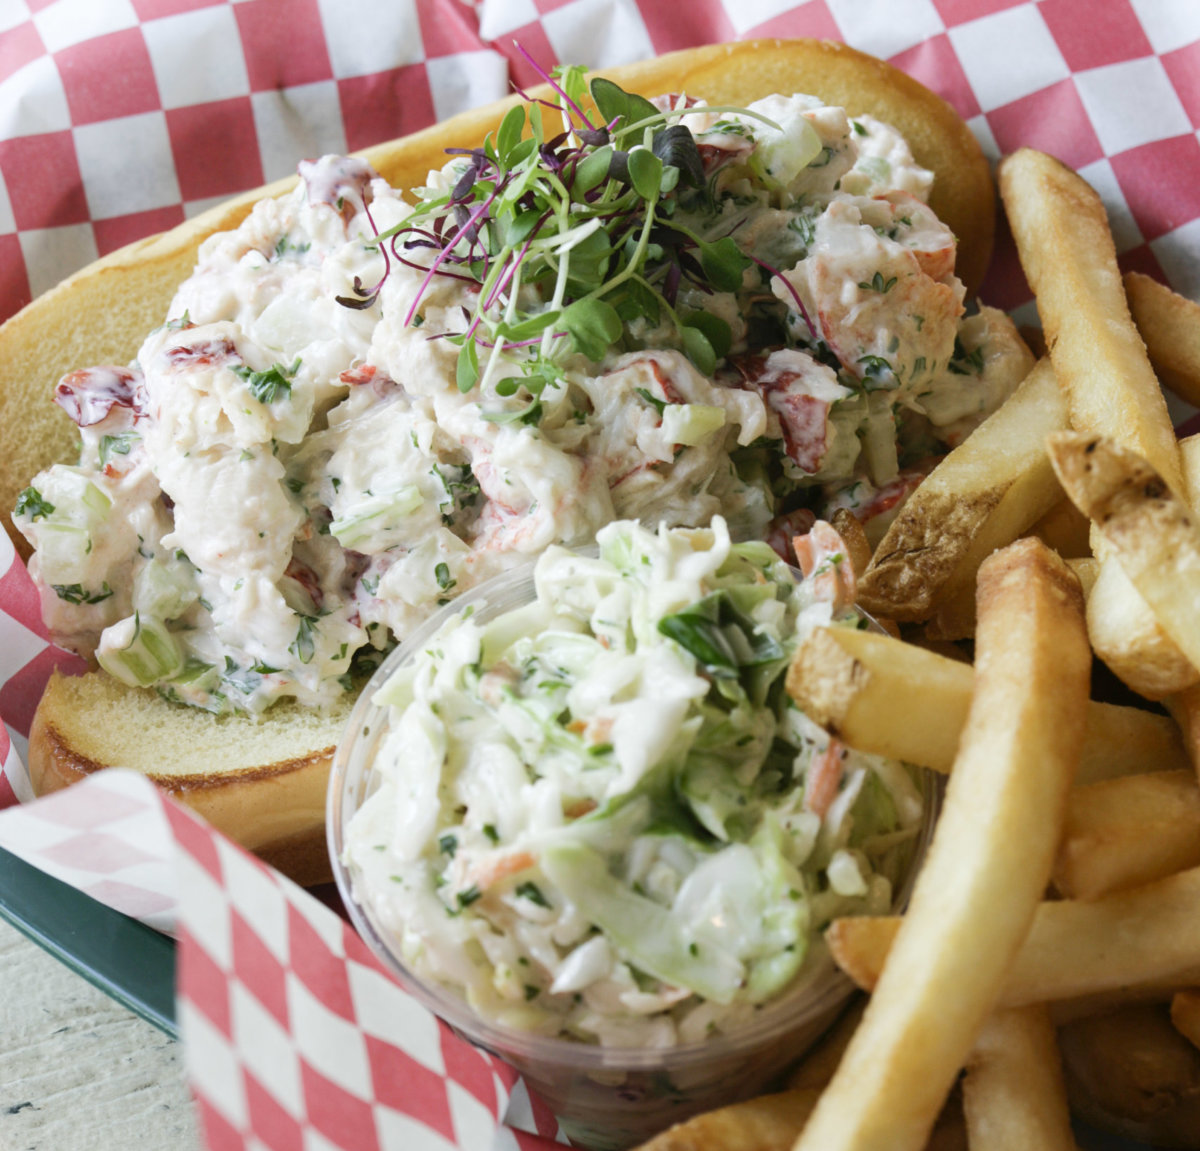 Bostwick’s cold lobster roll